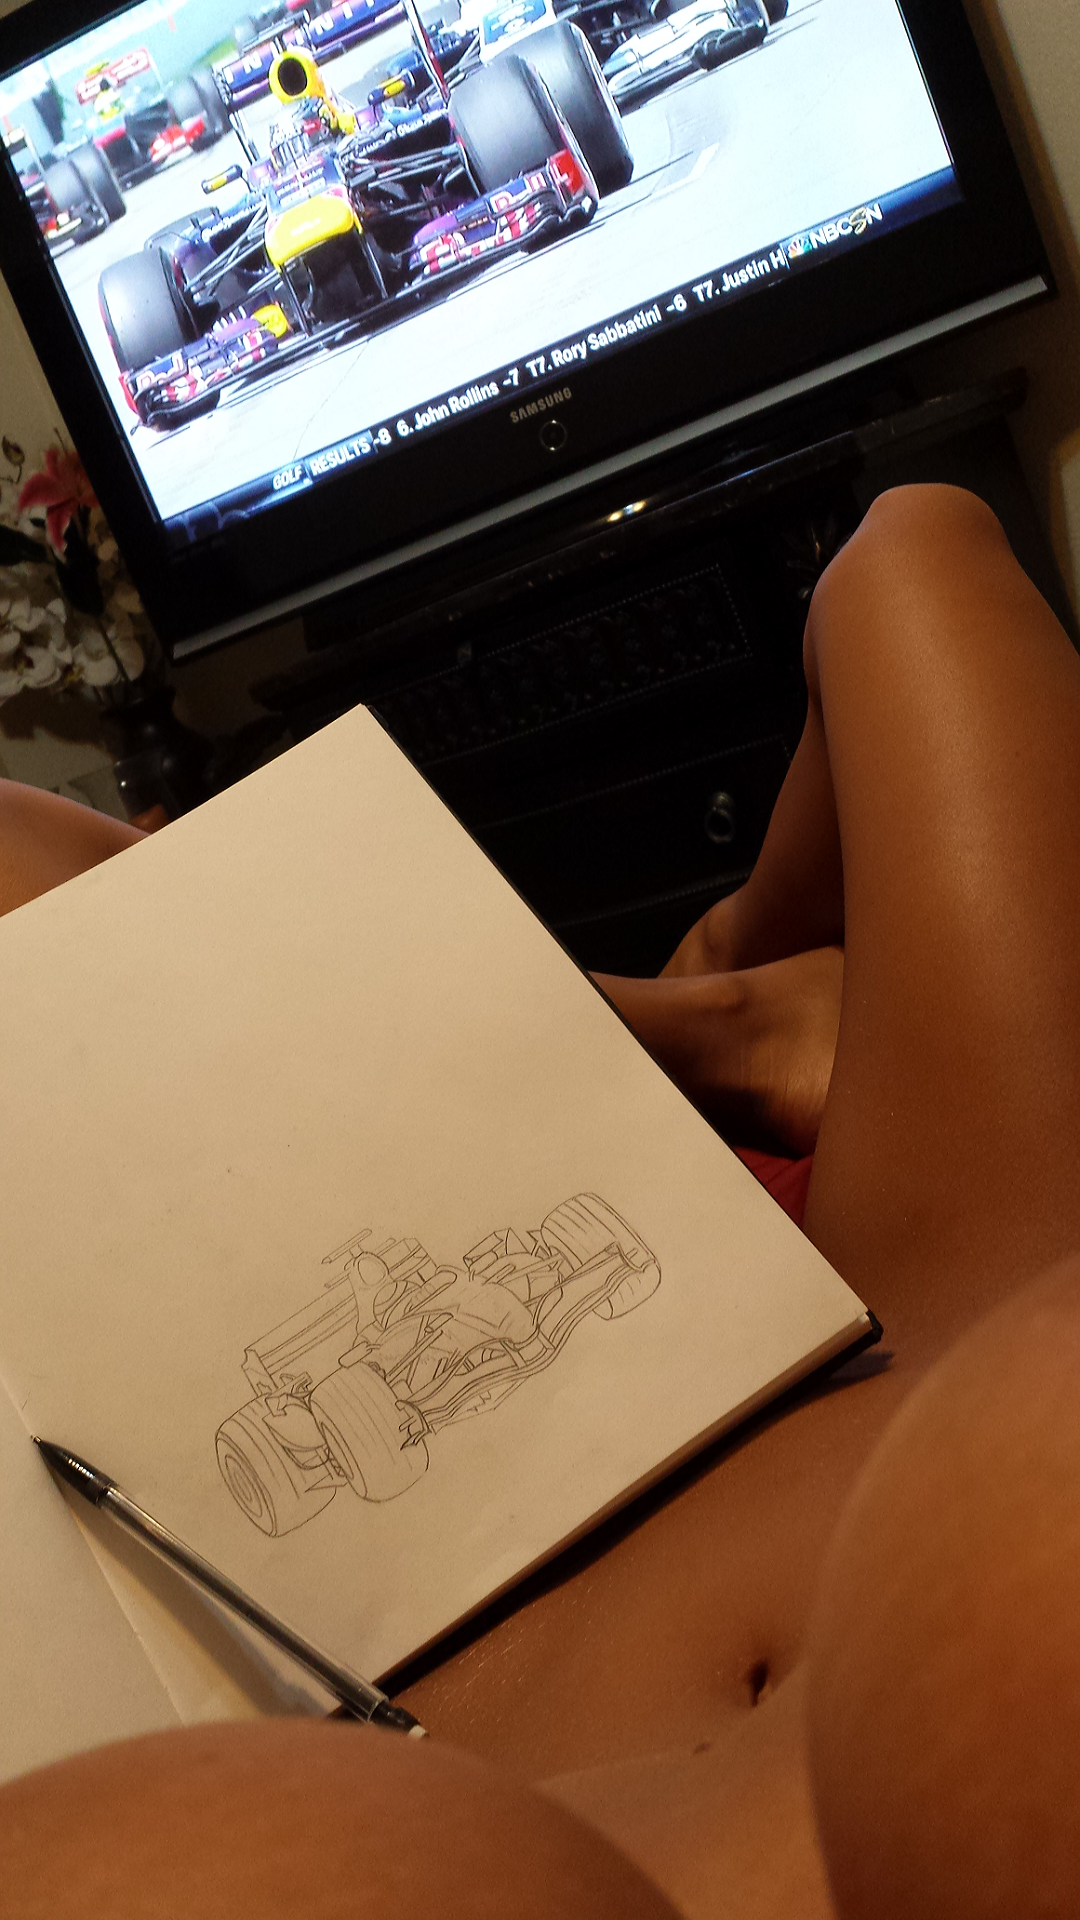 Silverstone #Formula1 race this weekend!..Between the Titty view of my late night doodling a #F1 car